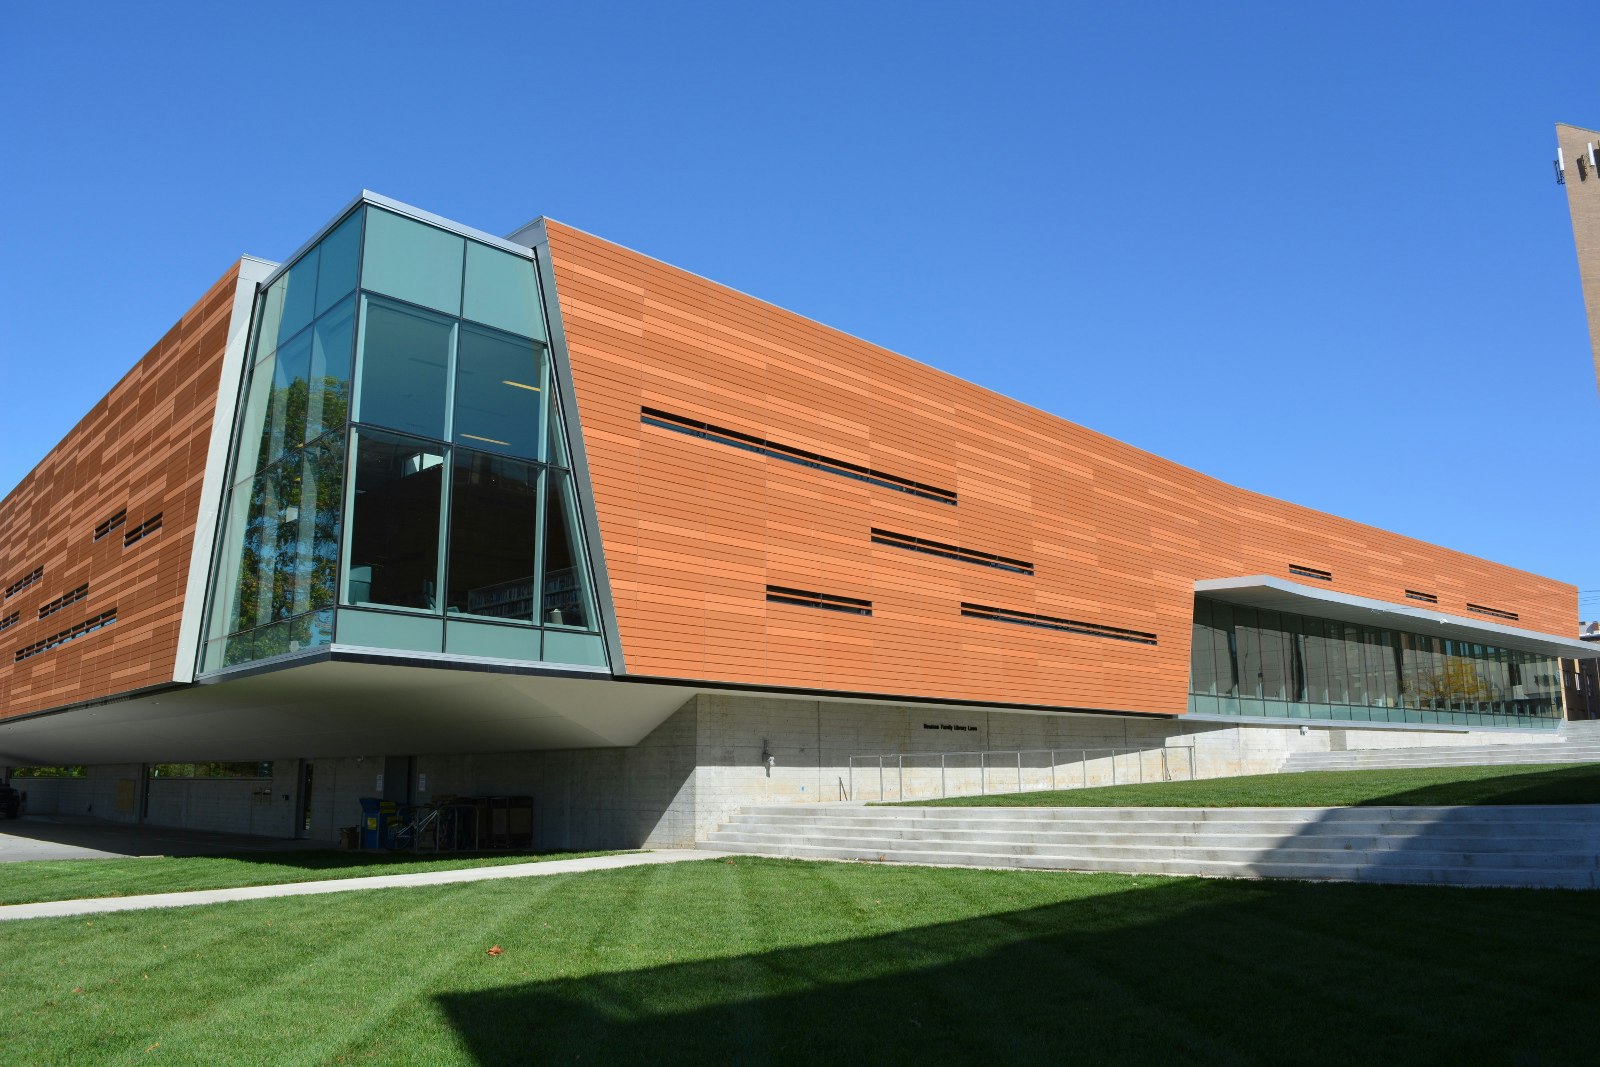 The modern exterior of Lawrence Public Library.